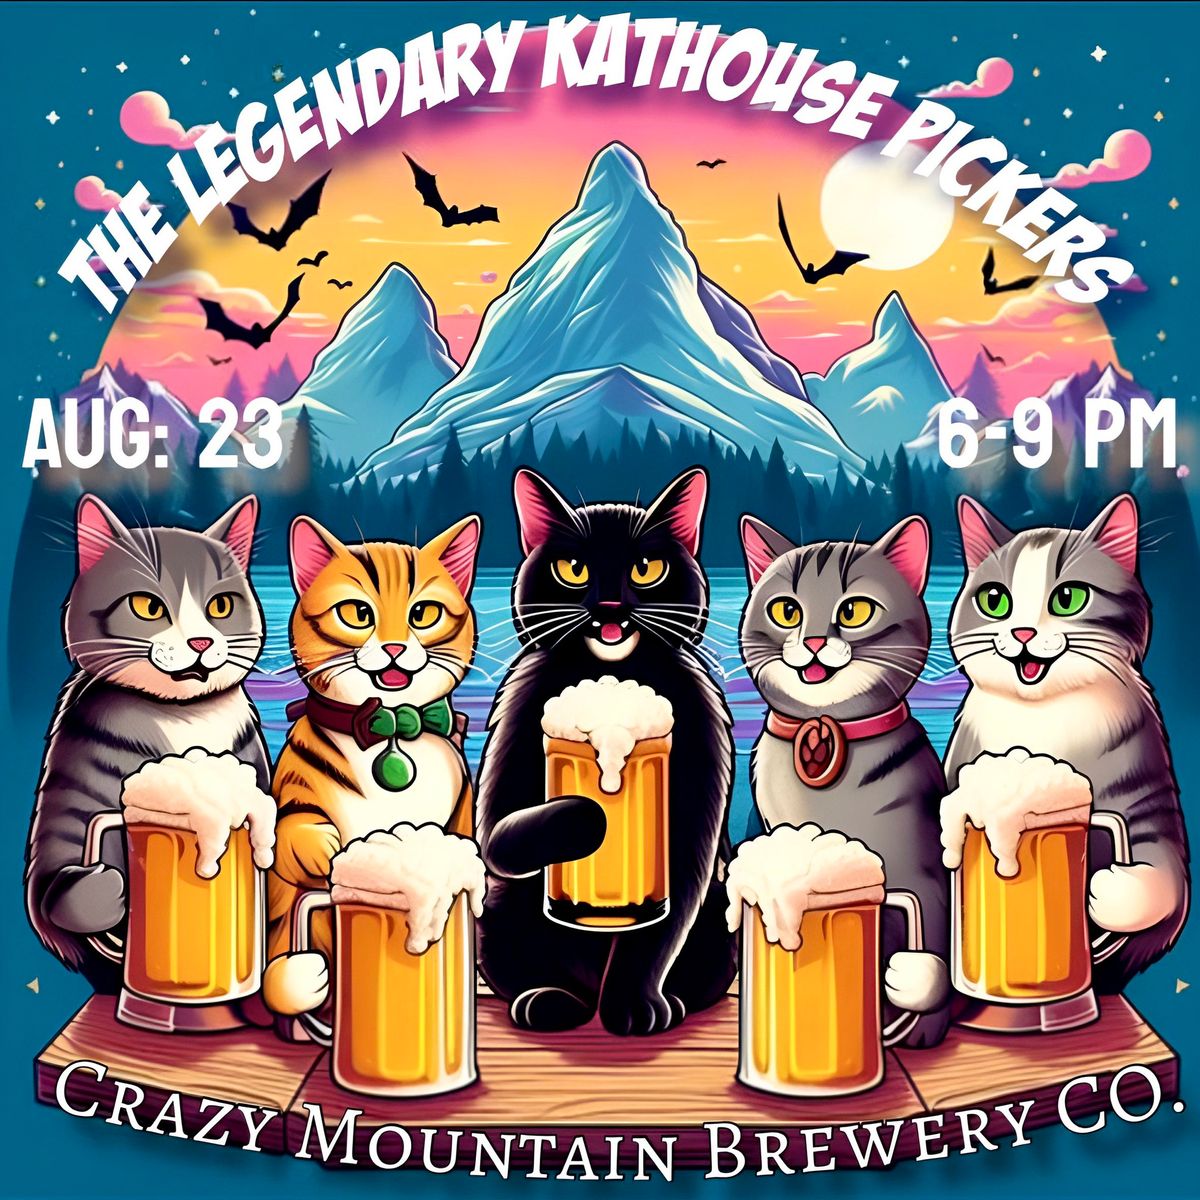 Crazy Mountain Brewery CO. w\/ The Legendary Kathouse Pickers